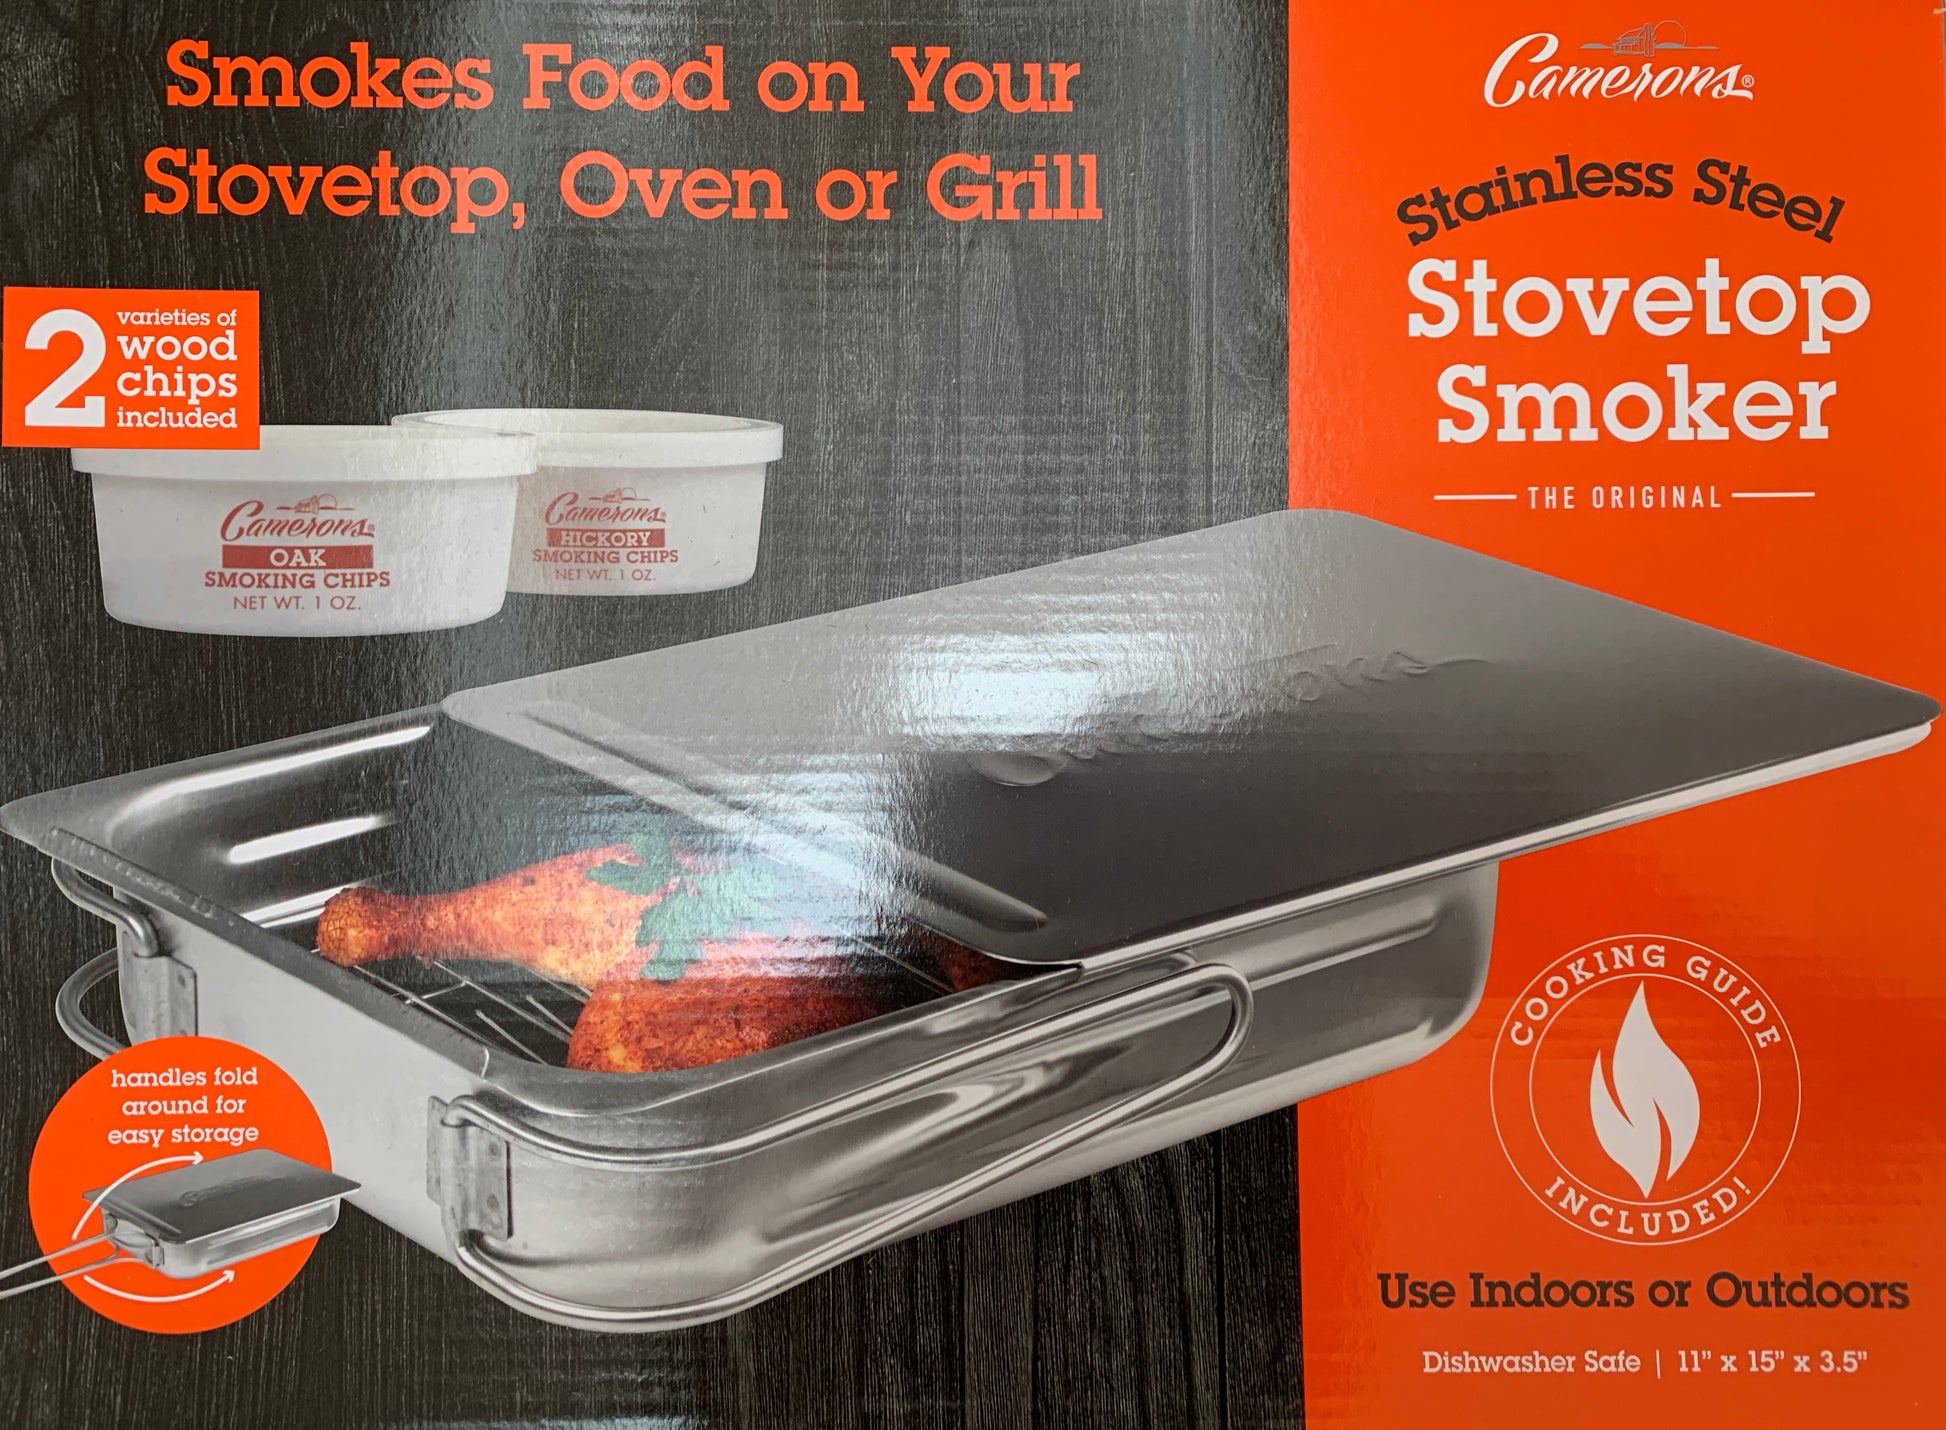 How to Use the Camerons Stovetop Smoker – Sous Chef UK